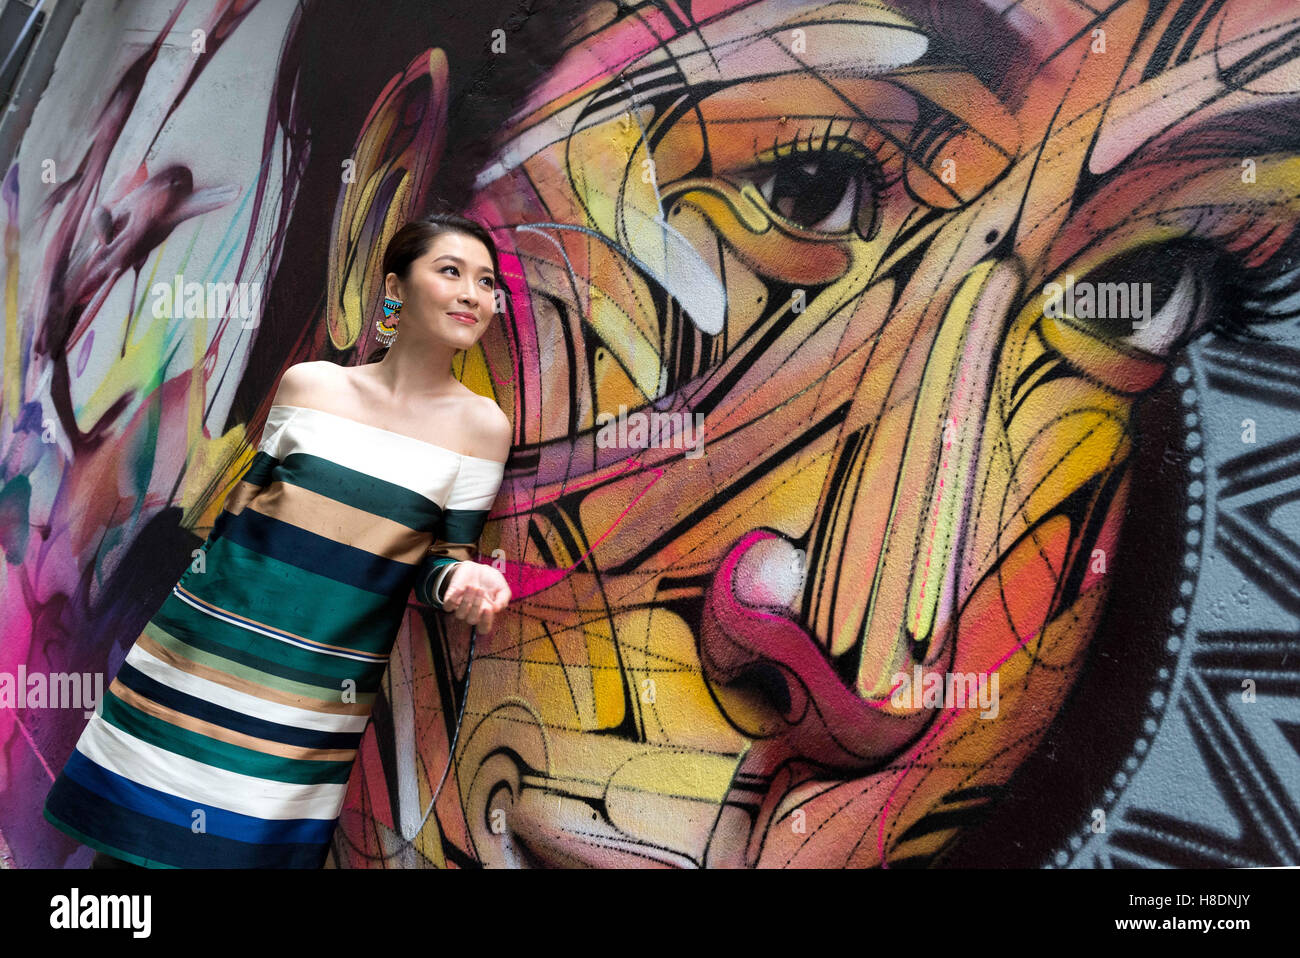 Hong Kong, Hong Kong S.A.R, China. 10th Nov, 2016. Wall painting by Parisian street artist Alexandre Monteiro aka Hopare of Hong Kong actress and canto pop star Niki Chow (pictured).''Walls of Change'' street art in Hong Kong ahead of the The 'Hope for Wildlife' Gala Dinner painted to raise awareness for the plight of endangered animals the world over.Sai Yin Pun Hong Kong.10th November 2016. Photo by Jayne Russell © Jayne Russell/ZUMA Wire/Alamy Live News Stock Photo